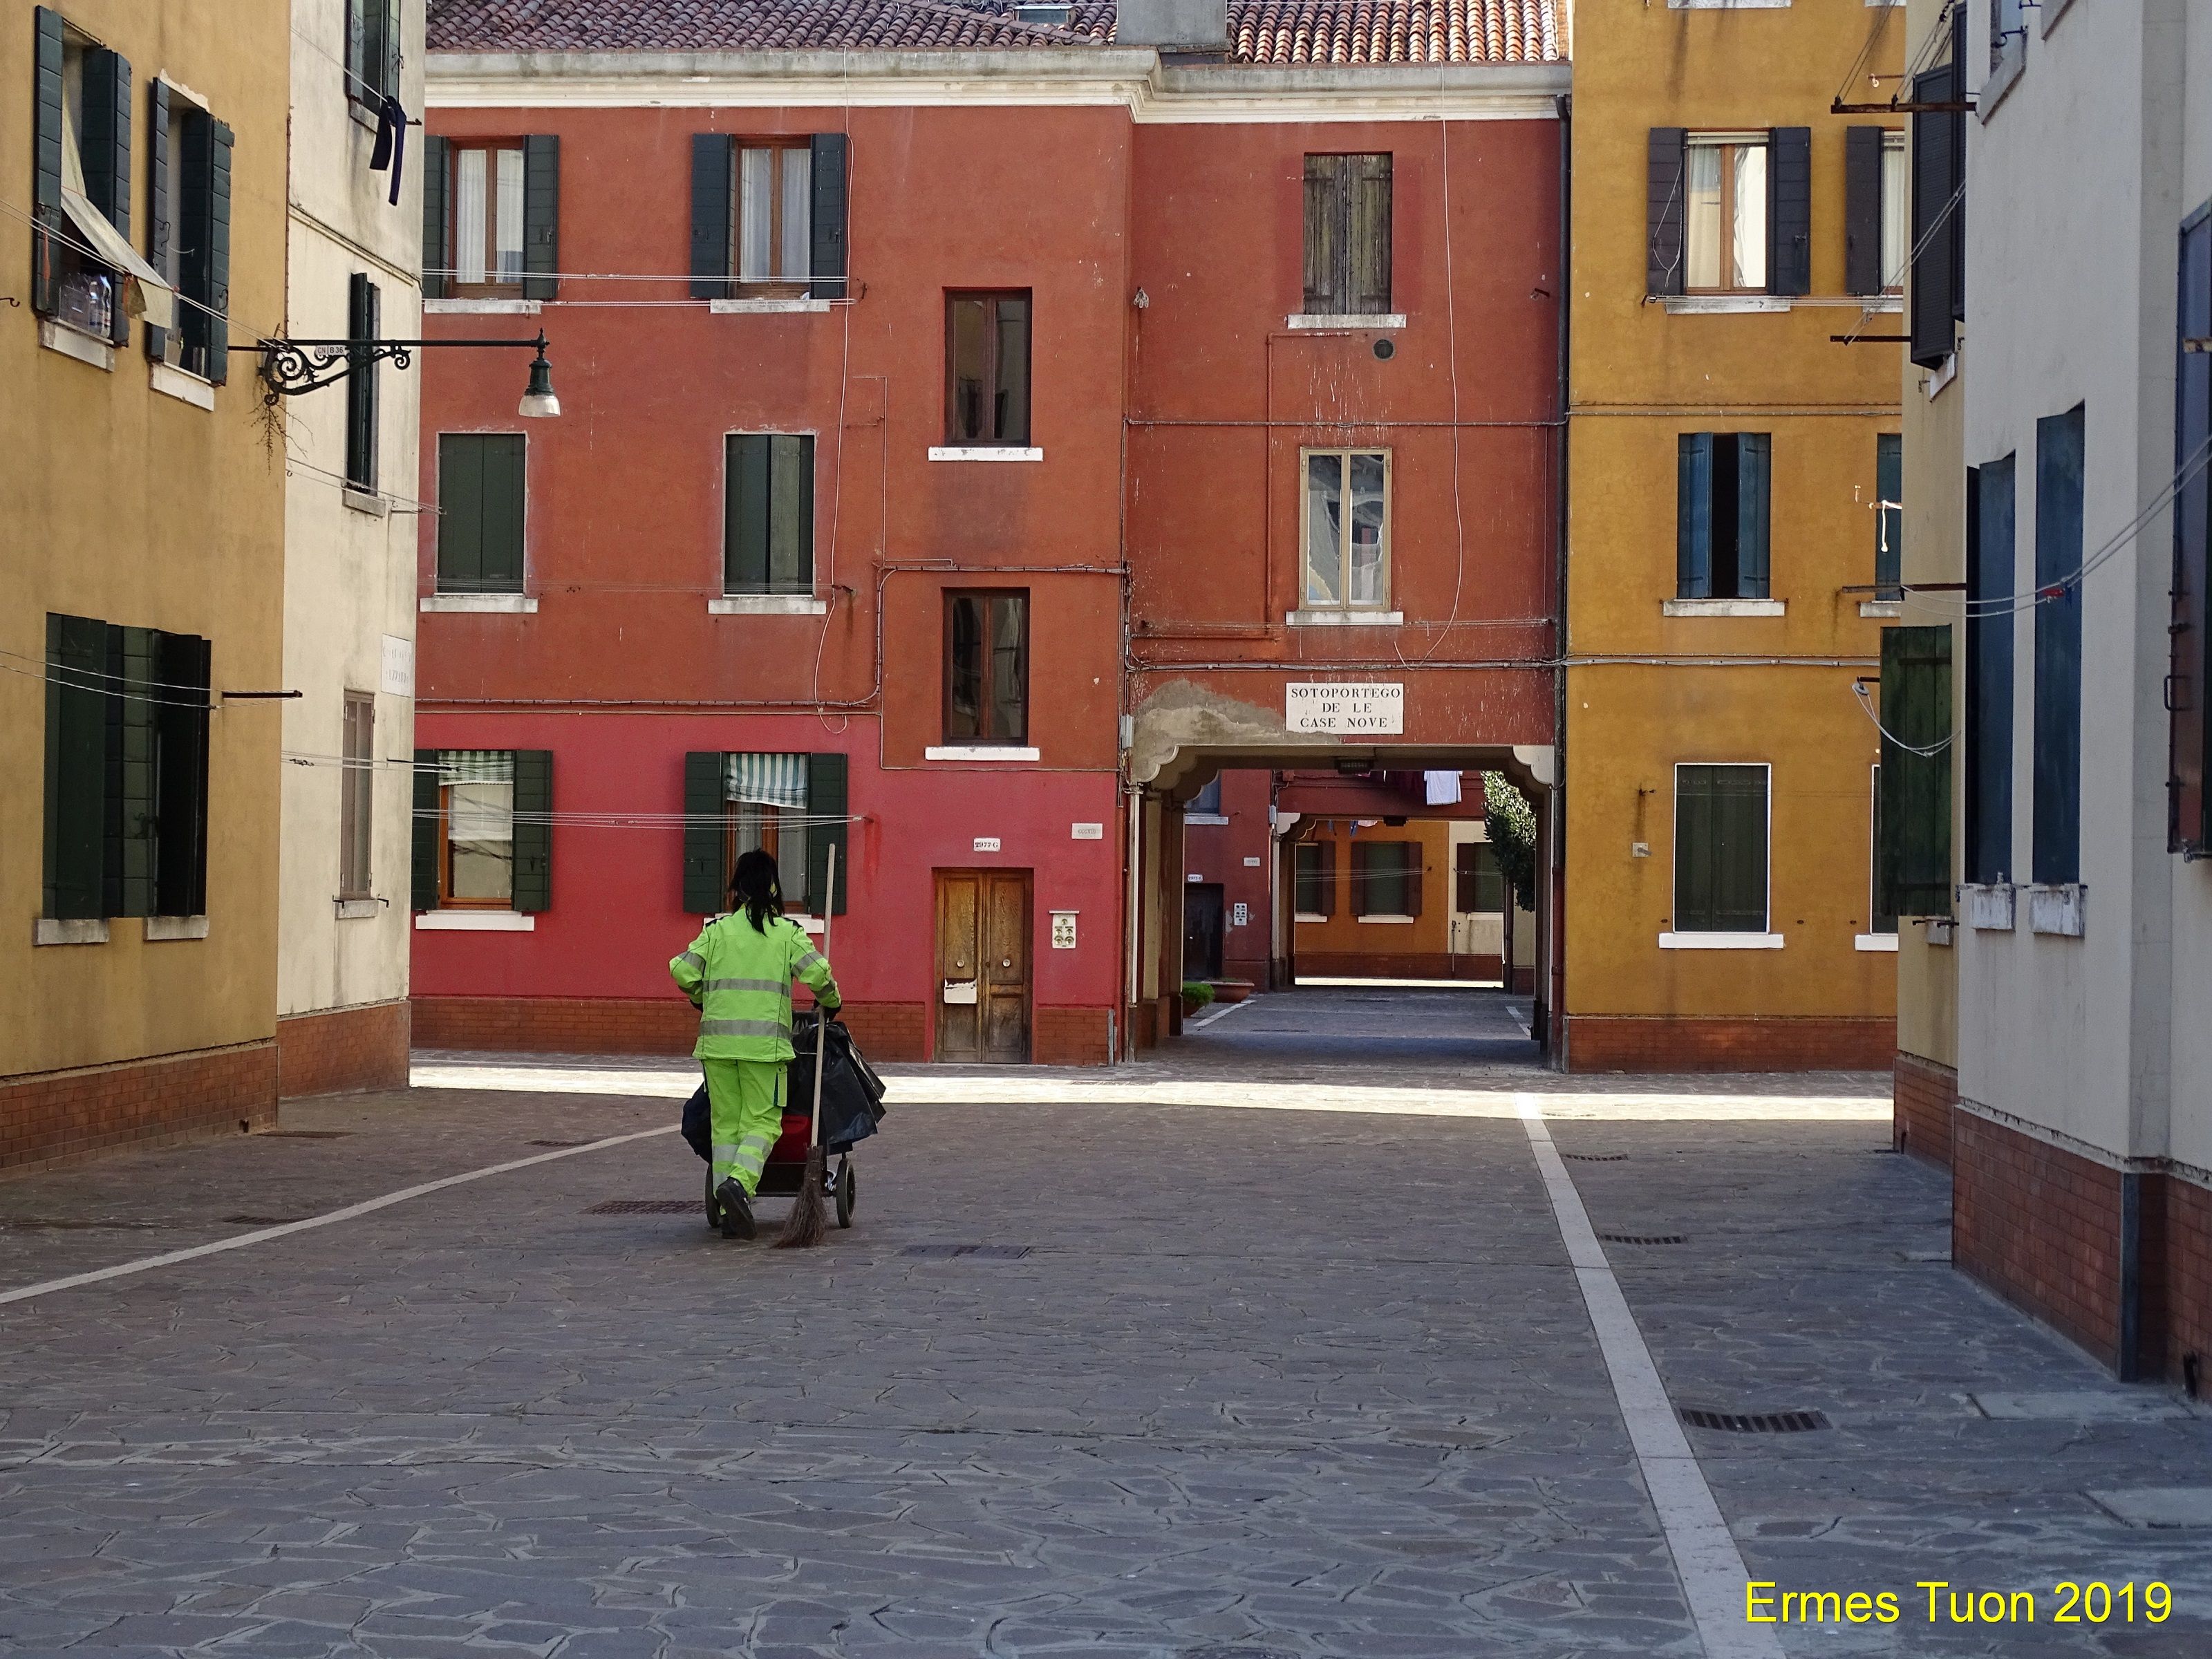 Caption: An Ecological operator cleaning the beautiful city of Venice - Local Guide  @ermest